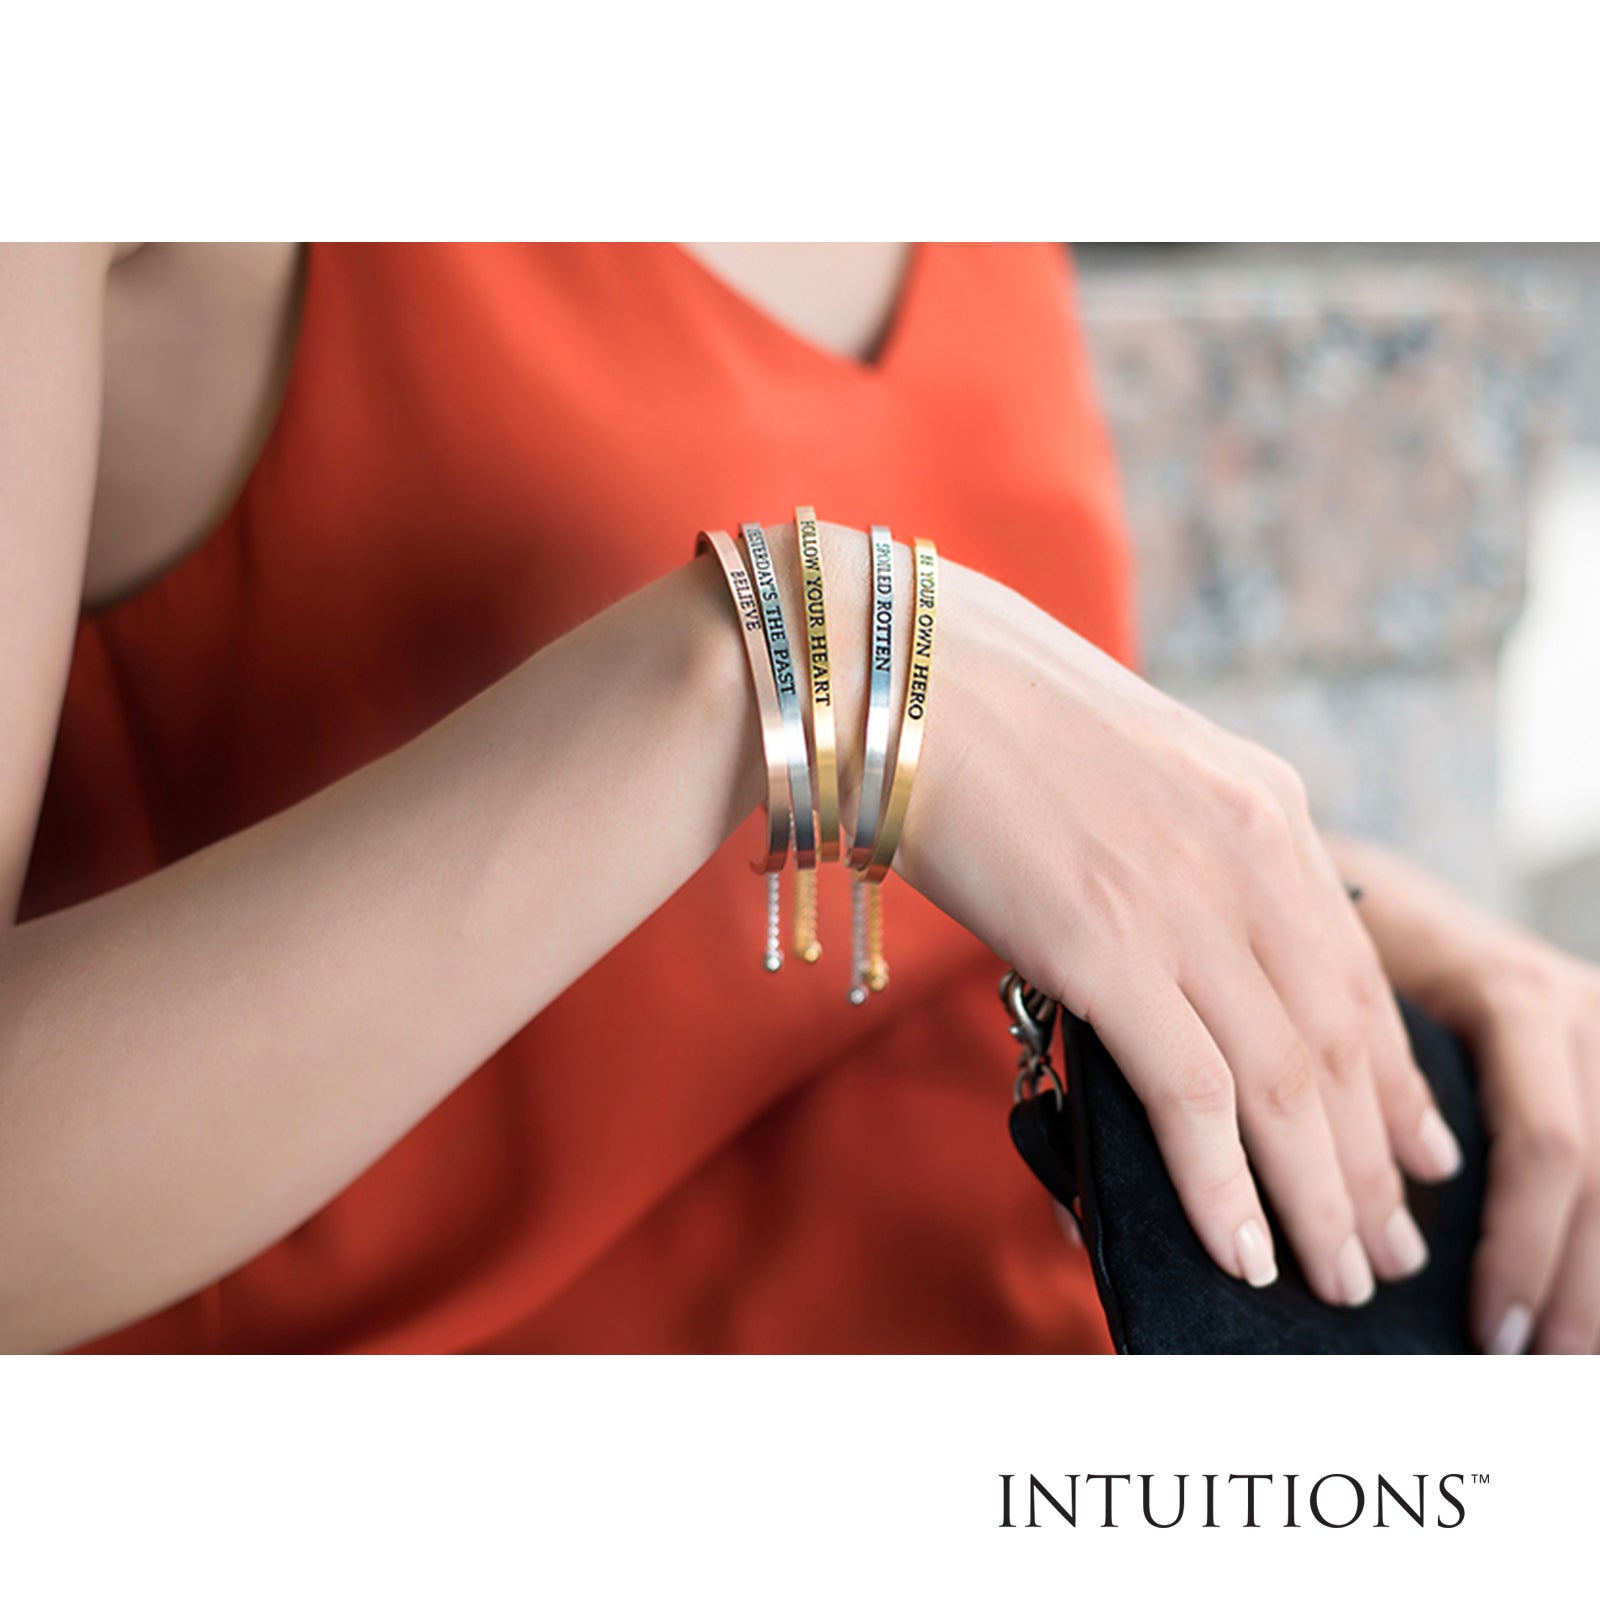 Intuitions Stainless Steel ATTITUDE IS EVERYTHING Diamond Accent Cuff Bangle Bracelet fine designer jewelry for men and women